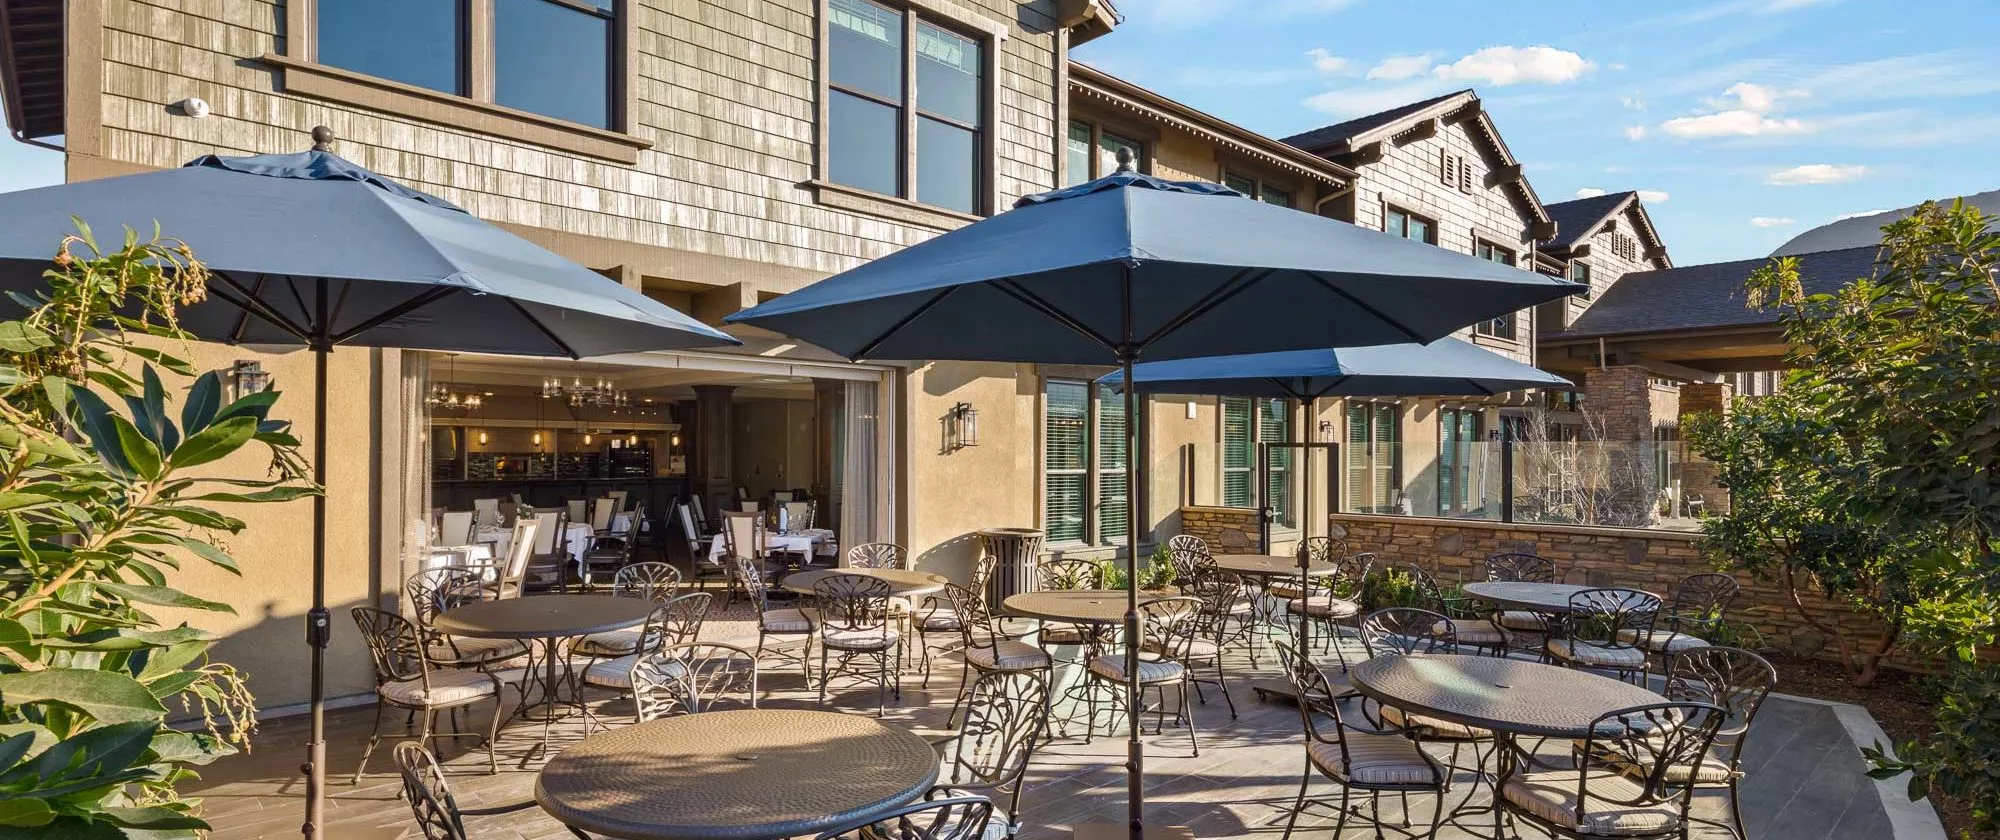 Agoura Hills patio with dining tables and umbrellas